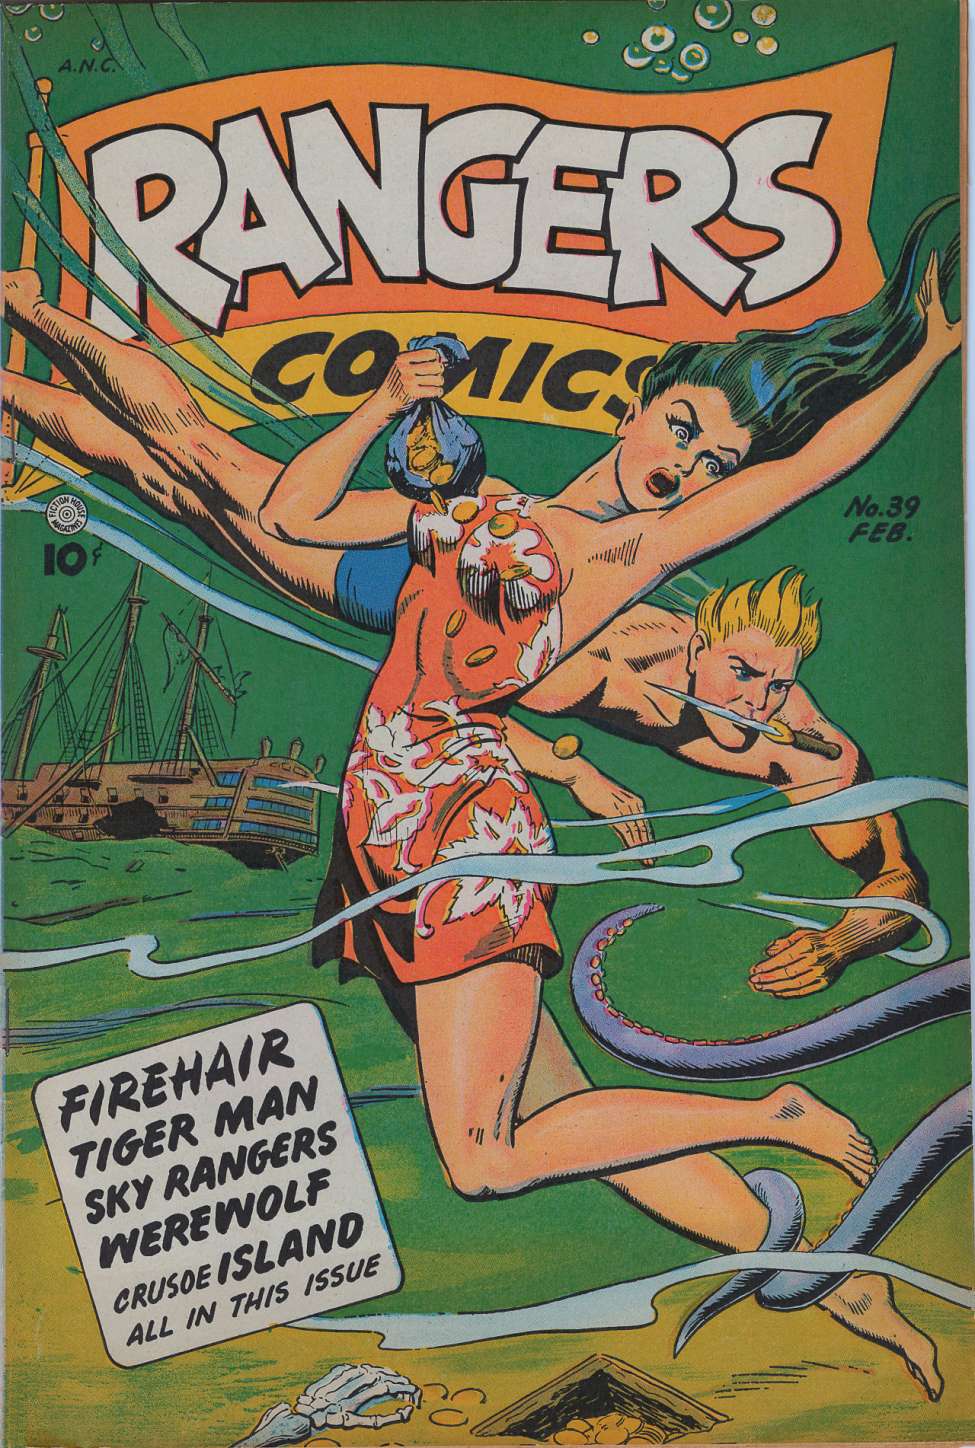 Book Cover For Rangers Comics 39